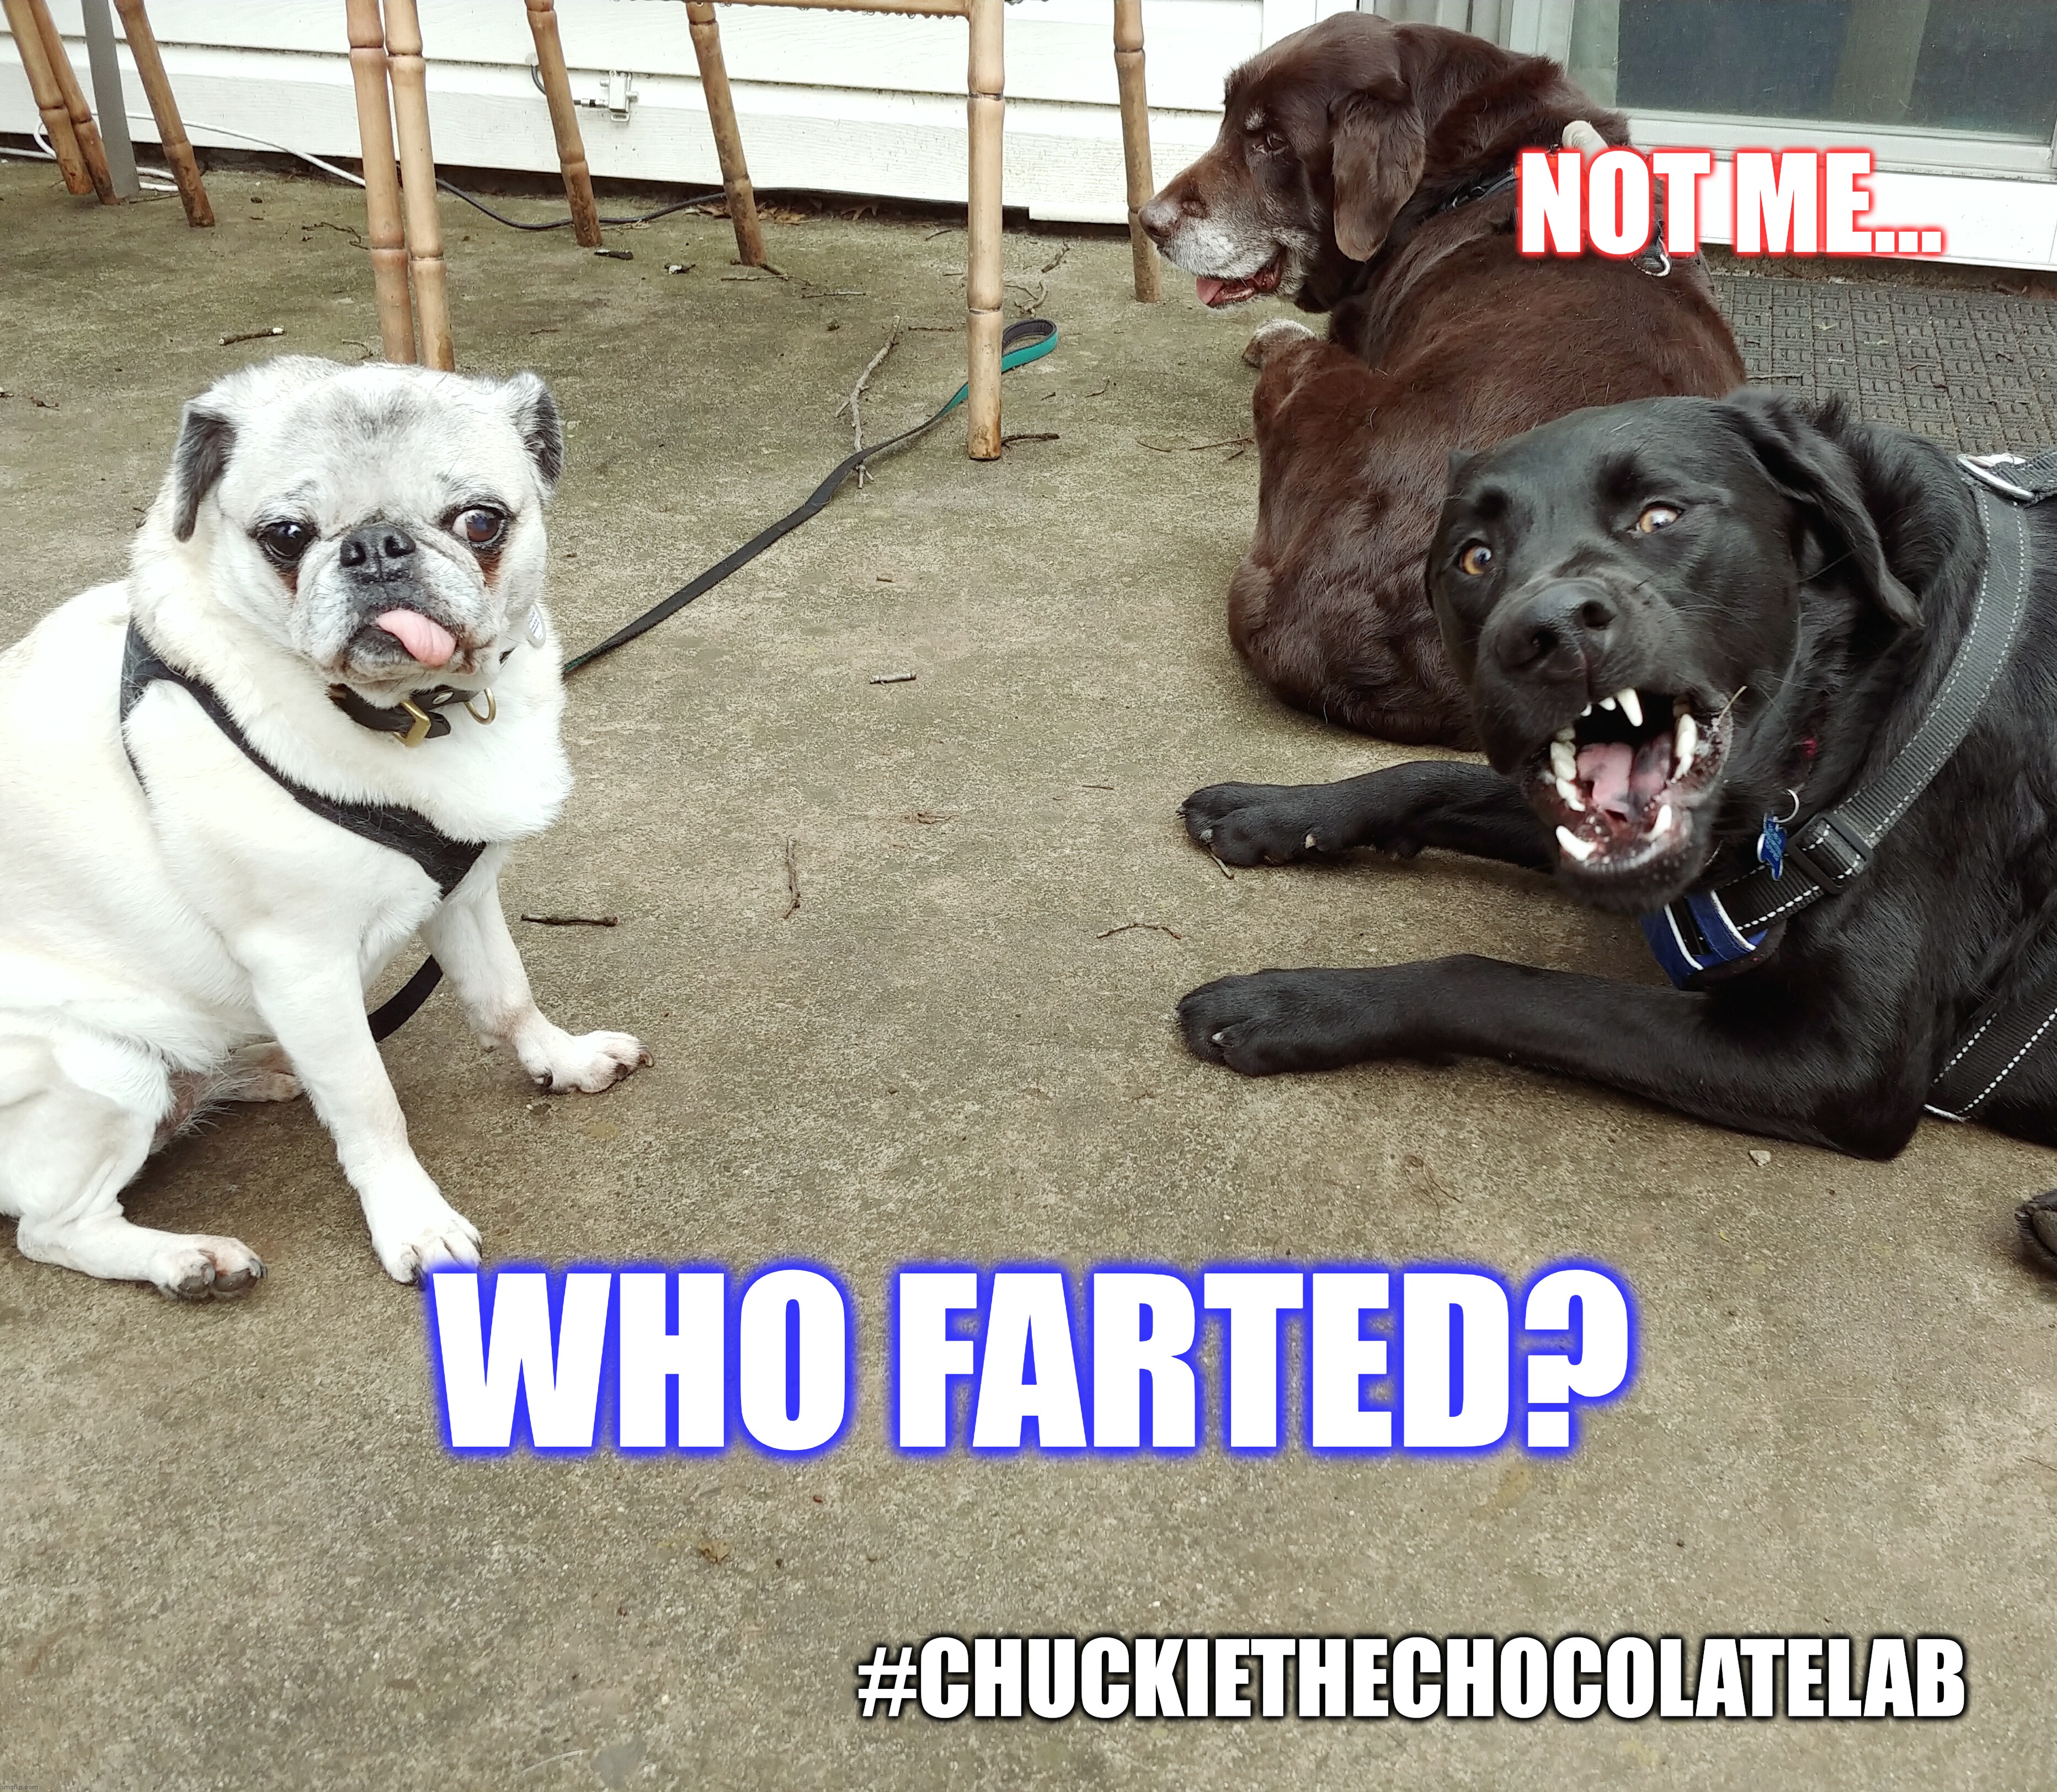 Who farted? | NOT ME... WHO FARTED? #CHUCKIETHECHOCOLATELAB | image tagged in chuckie the chocolate lab,funny,memes,dogs,farts,fart | made w/ Imgflip meme maker